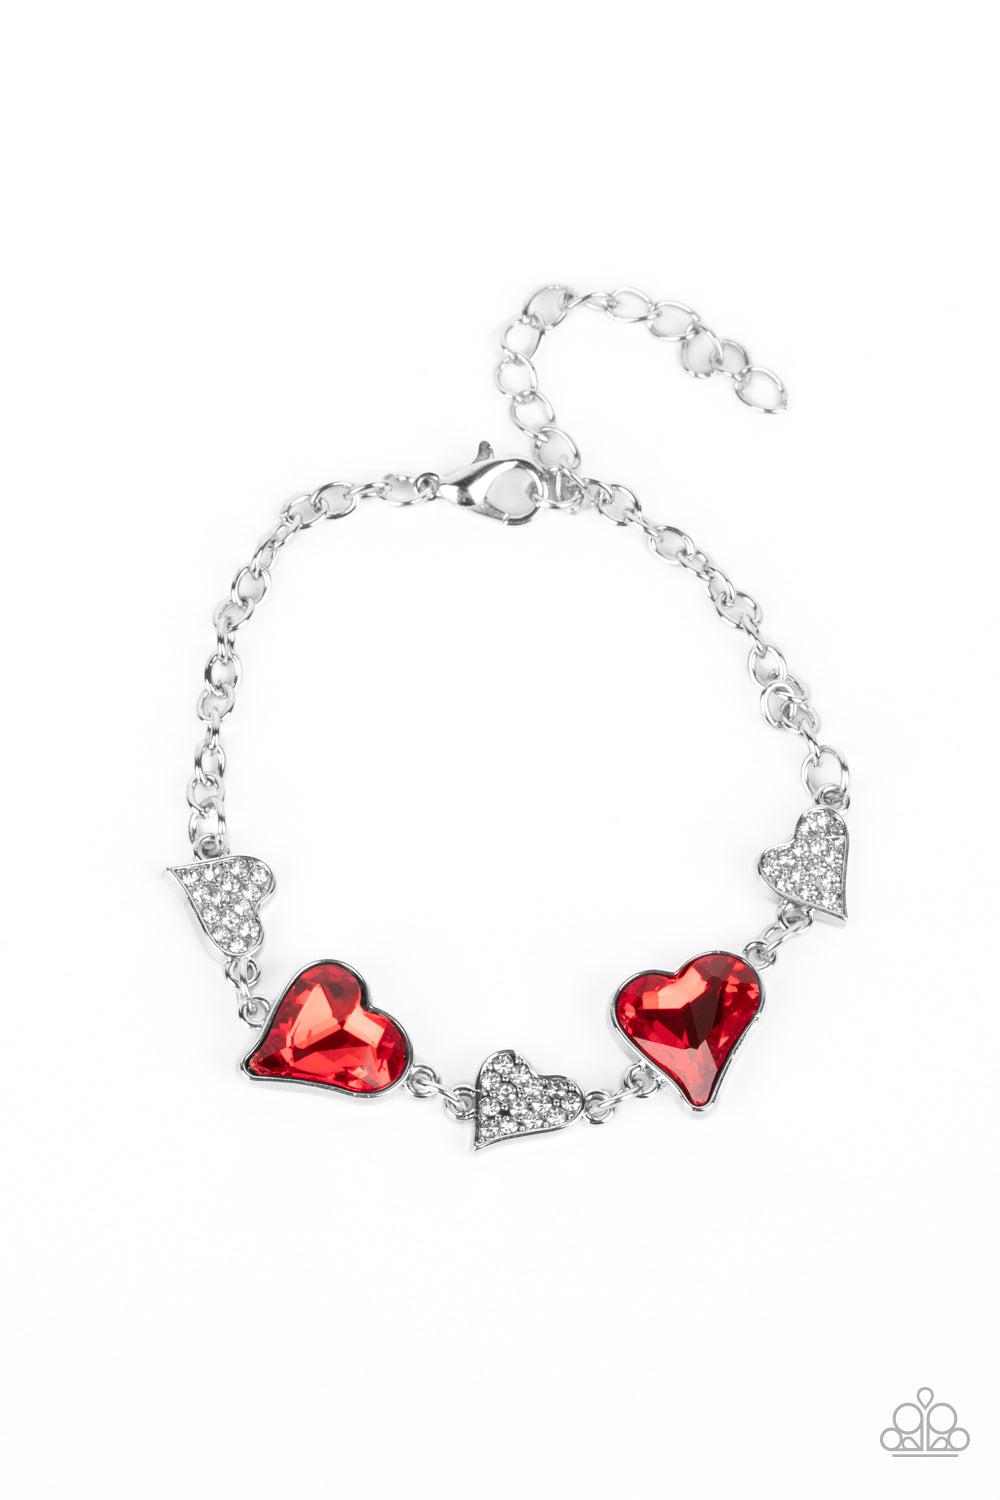 Cluelessly Crushing Red Rhinestone Heart Bracelet - Paparazzi Accessories- lightbox - CarasShop.com - $5 Jewelry by Cara Jewels